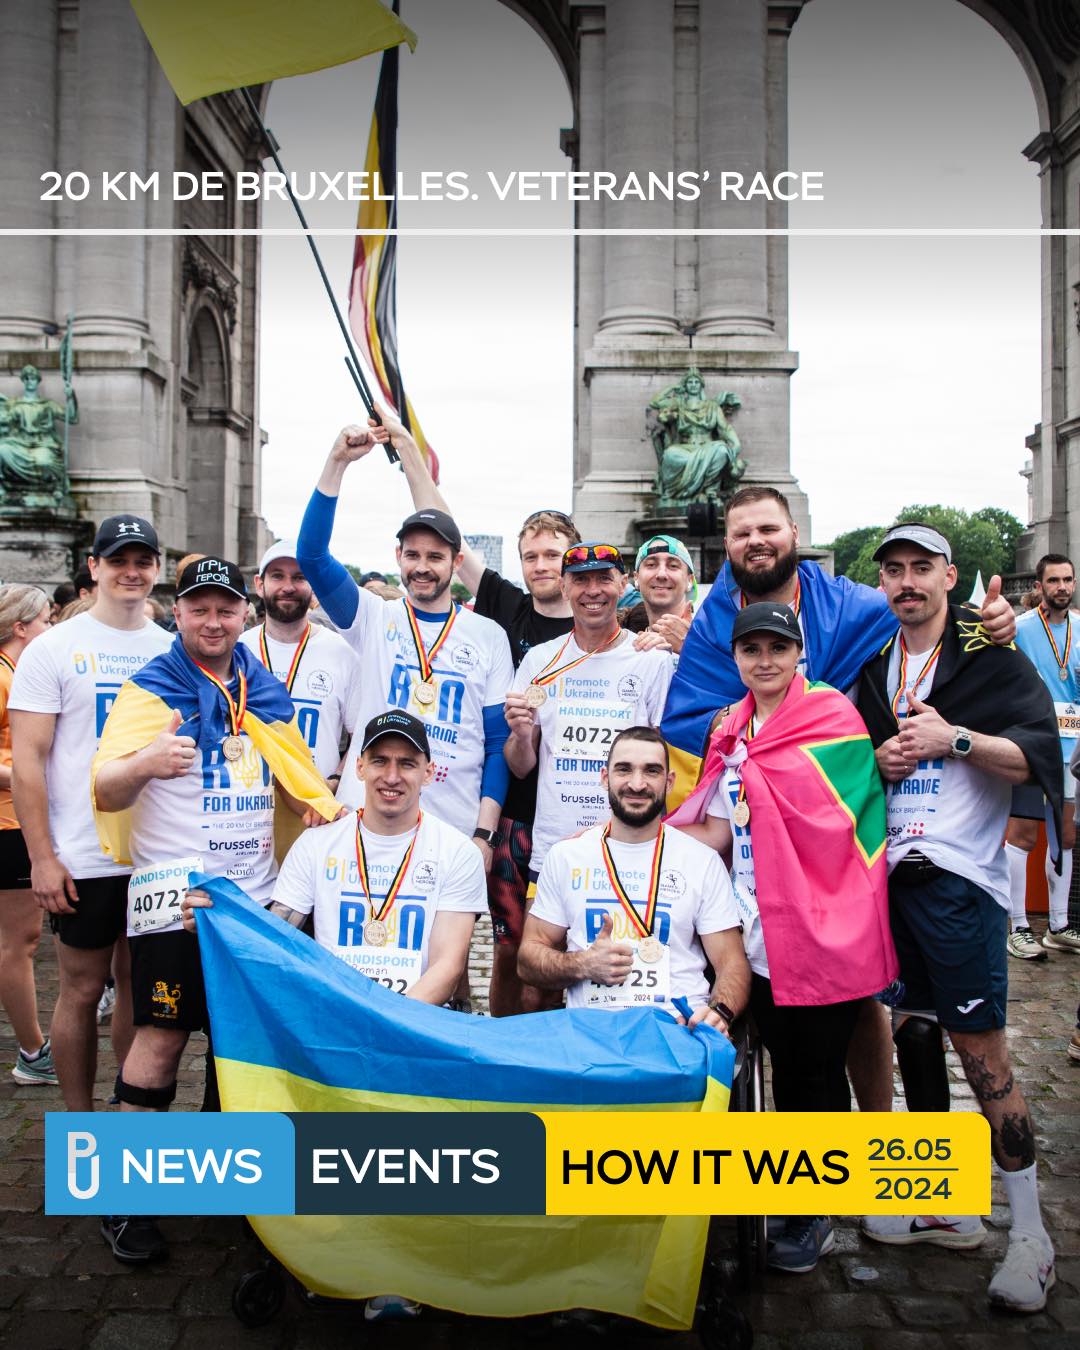 Yesterday our veterans completed a #20kmdebruxelles